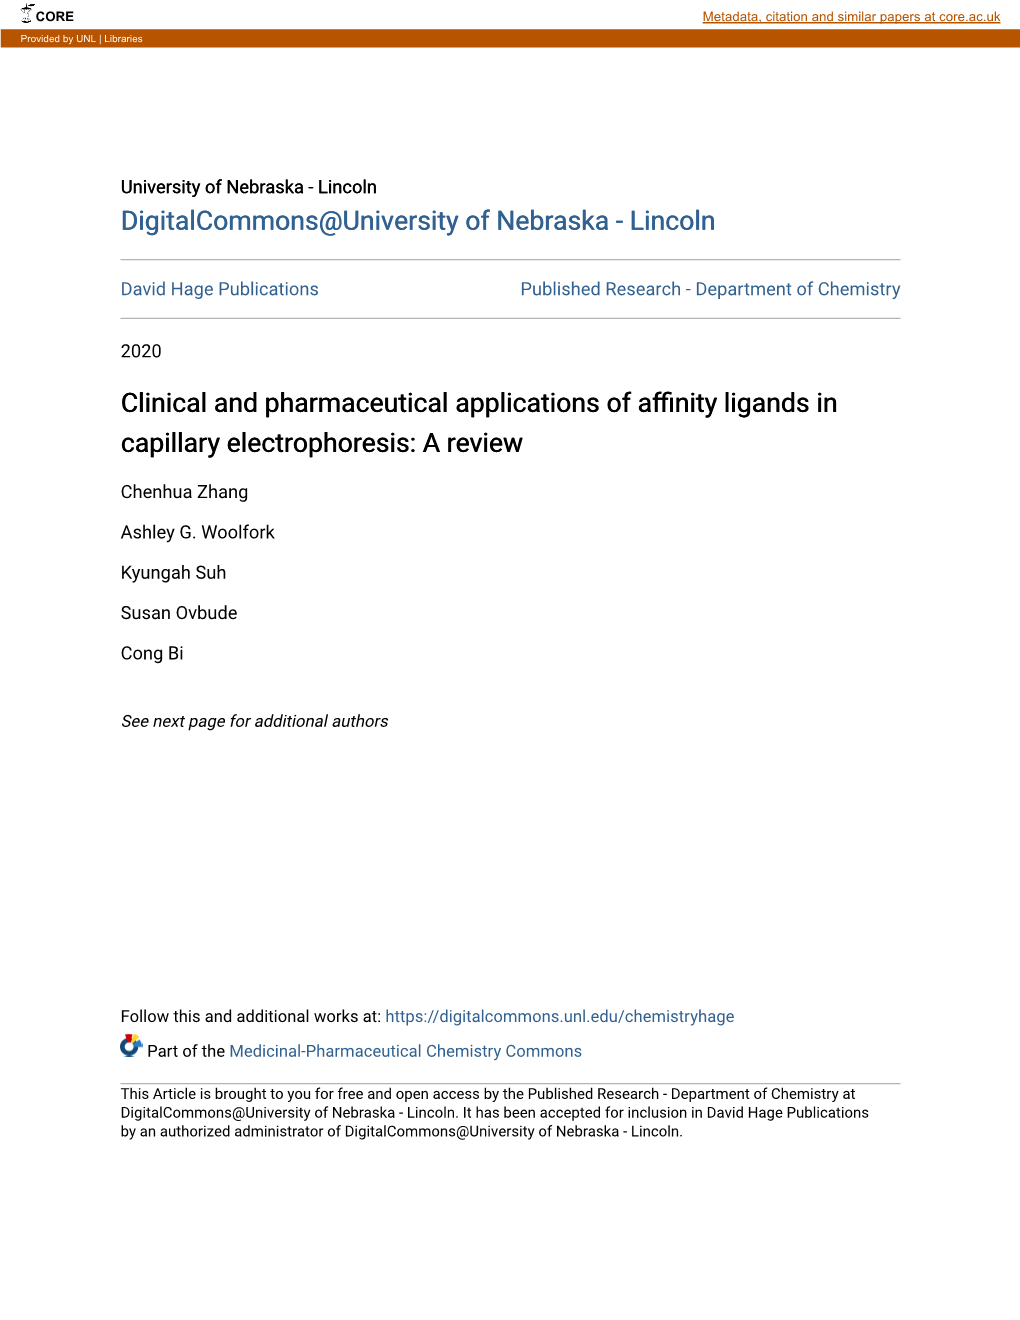 Clinical and Pharmaceutical Applications of Affinity Ligands in Capillary Electrophoresis: a Review